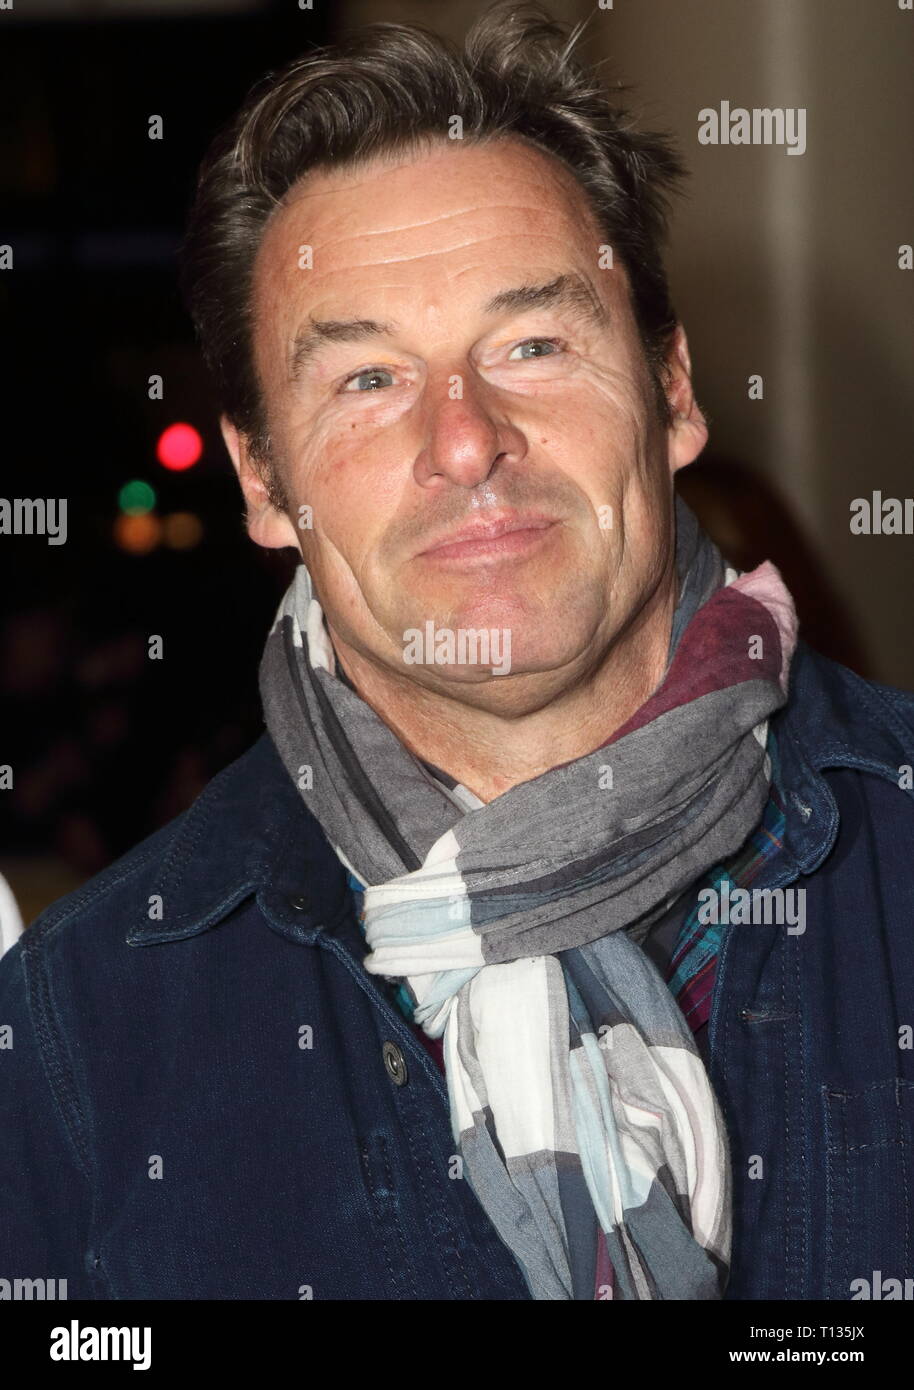 Only Fools and Horses Press night at the Theatre Royal Haymarket, Suffolk Street, London  Featuring: Jesse Birdsall Where: London, United Kingdom When: 19 Feb 2019 Credit: WENN.com Stock Photo